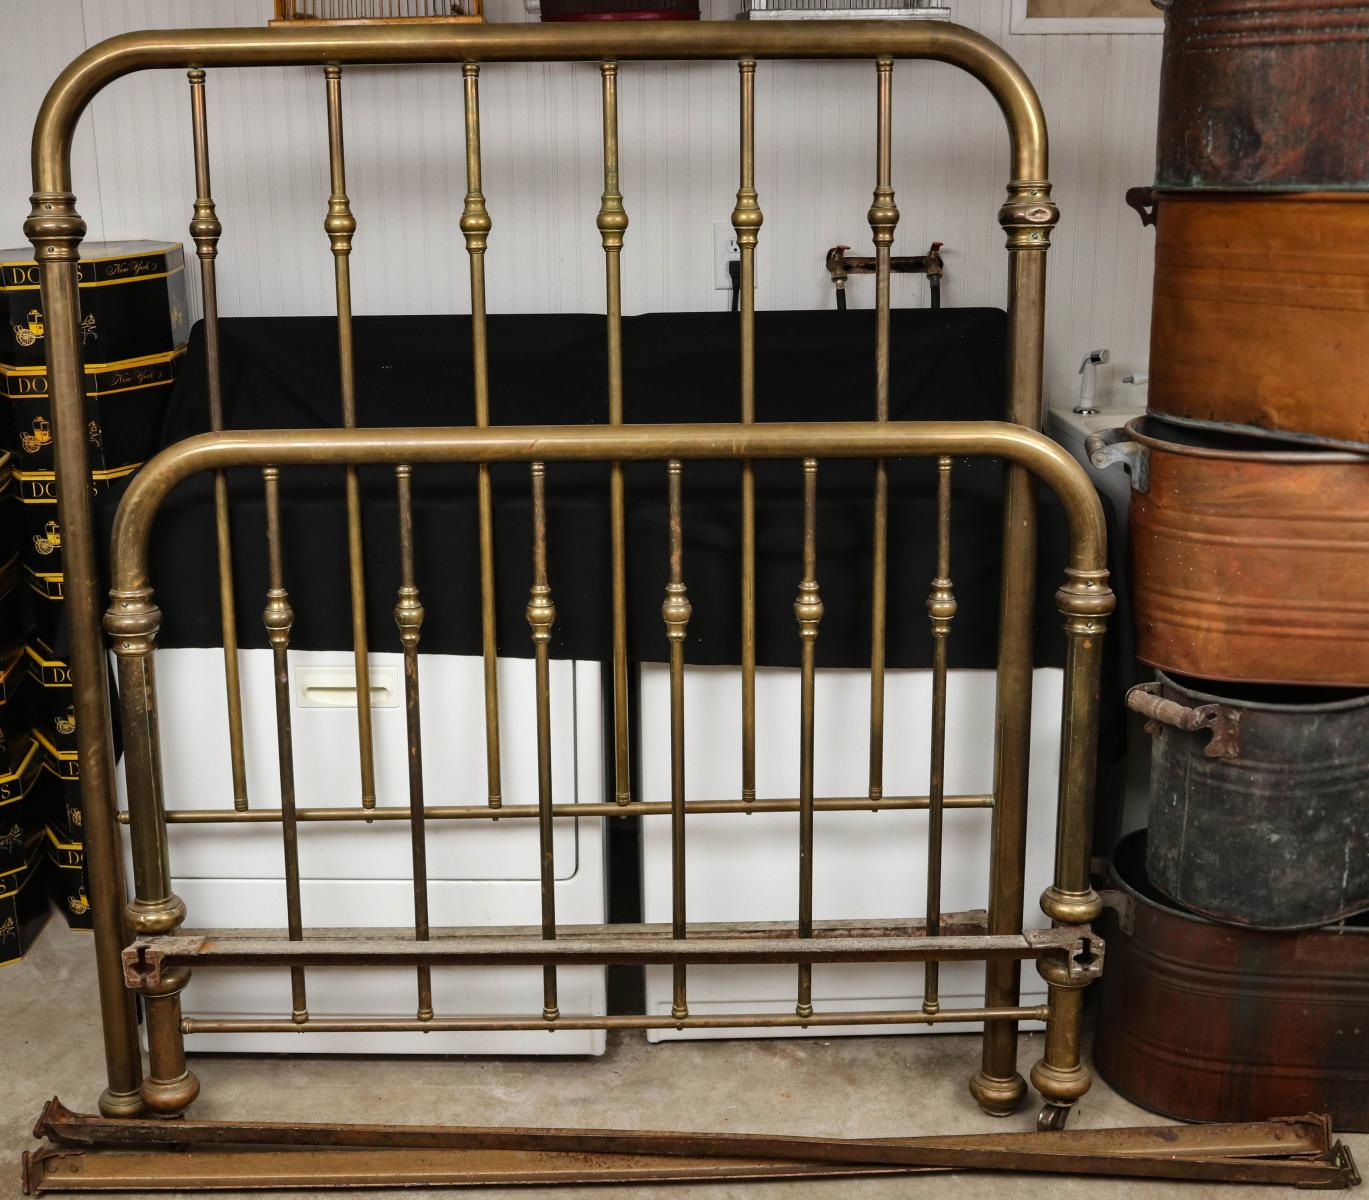 AN EARLY 20TH CENTURY BRASS BED